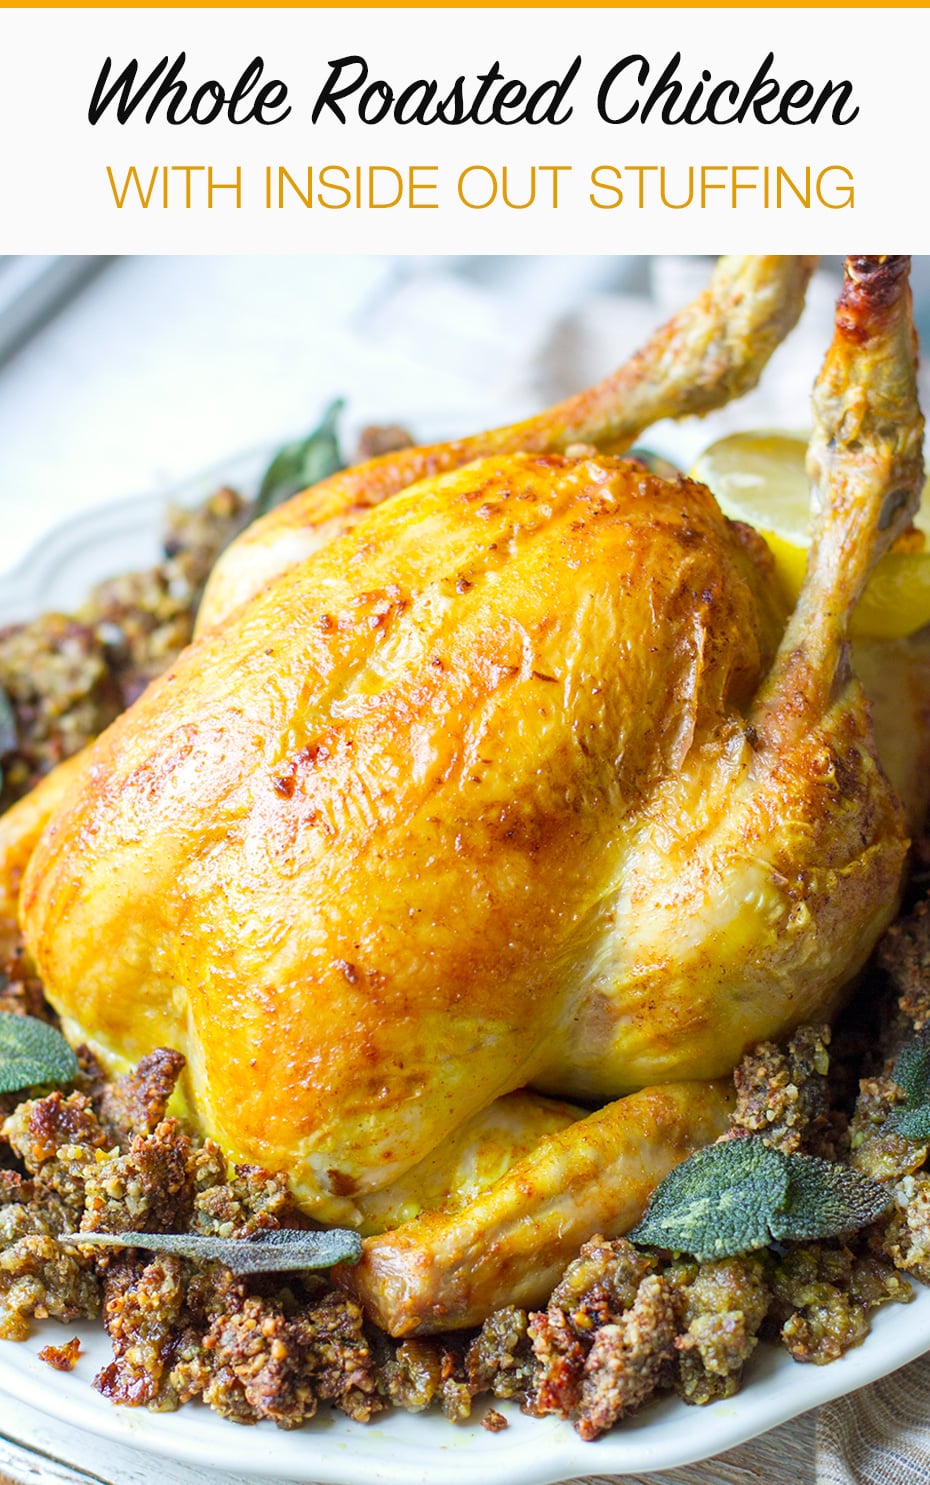 Whole Roasted Chicken With Inside Out Stuffing (Paleo, Gluten-Free, Keto)